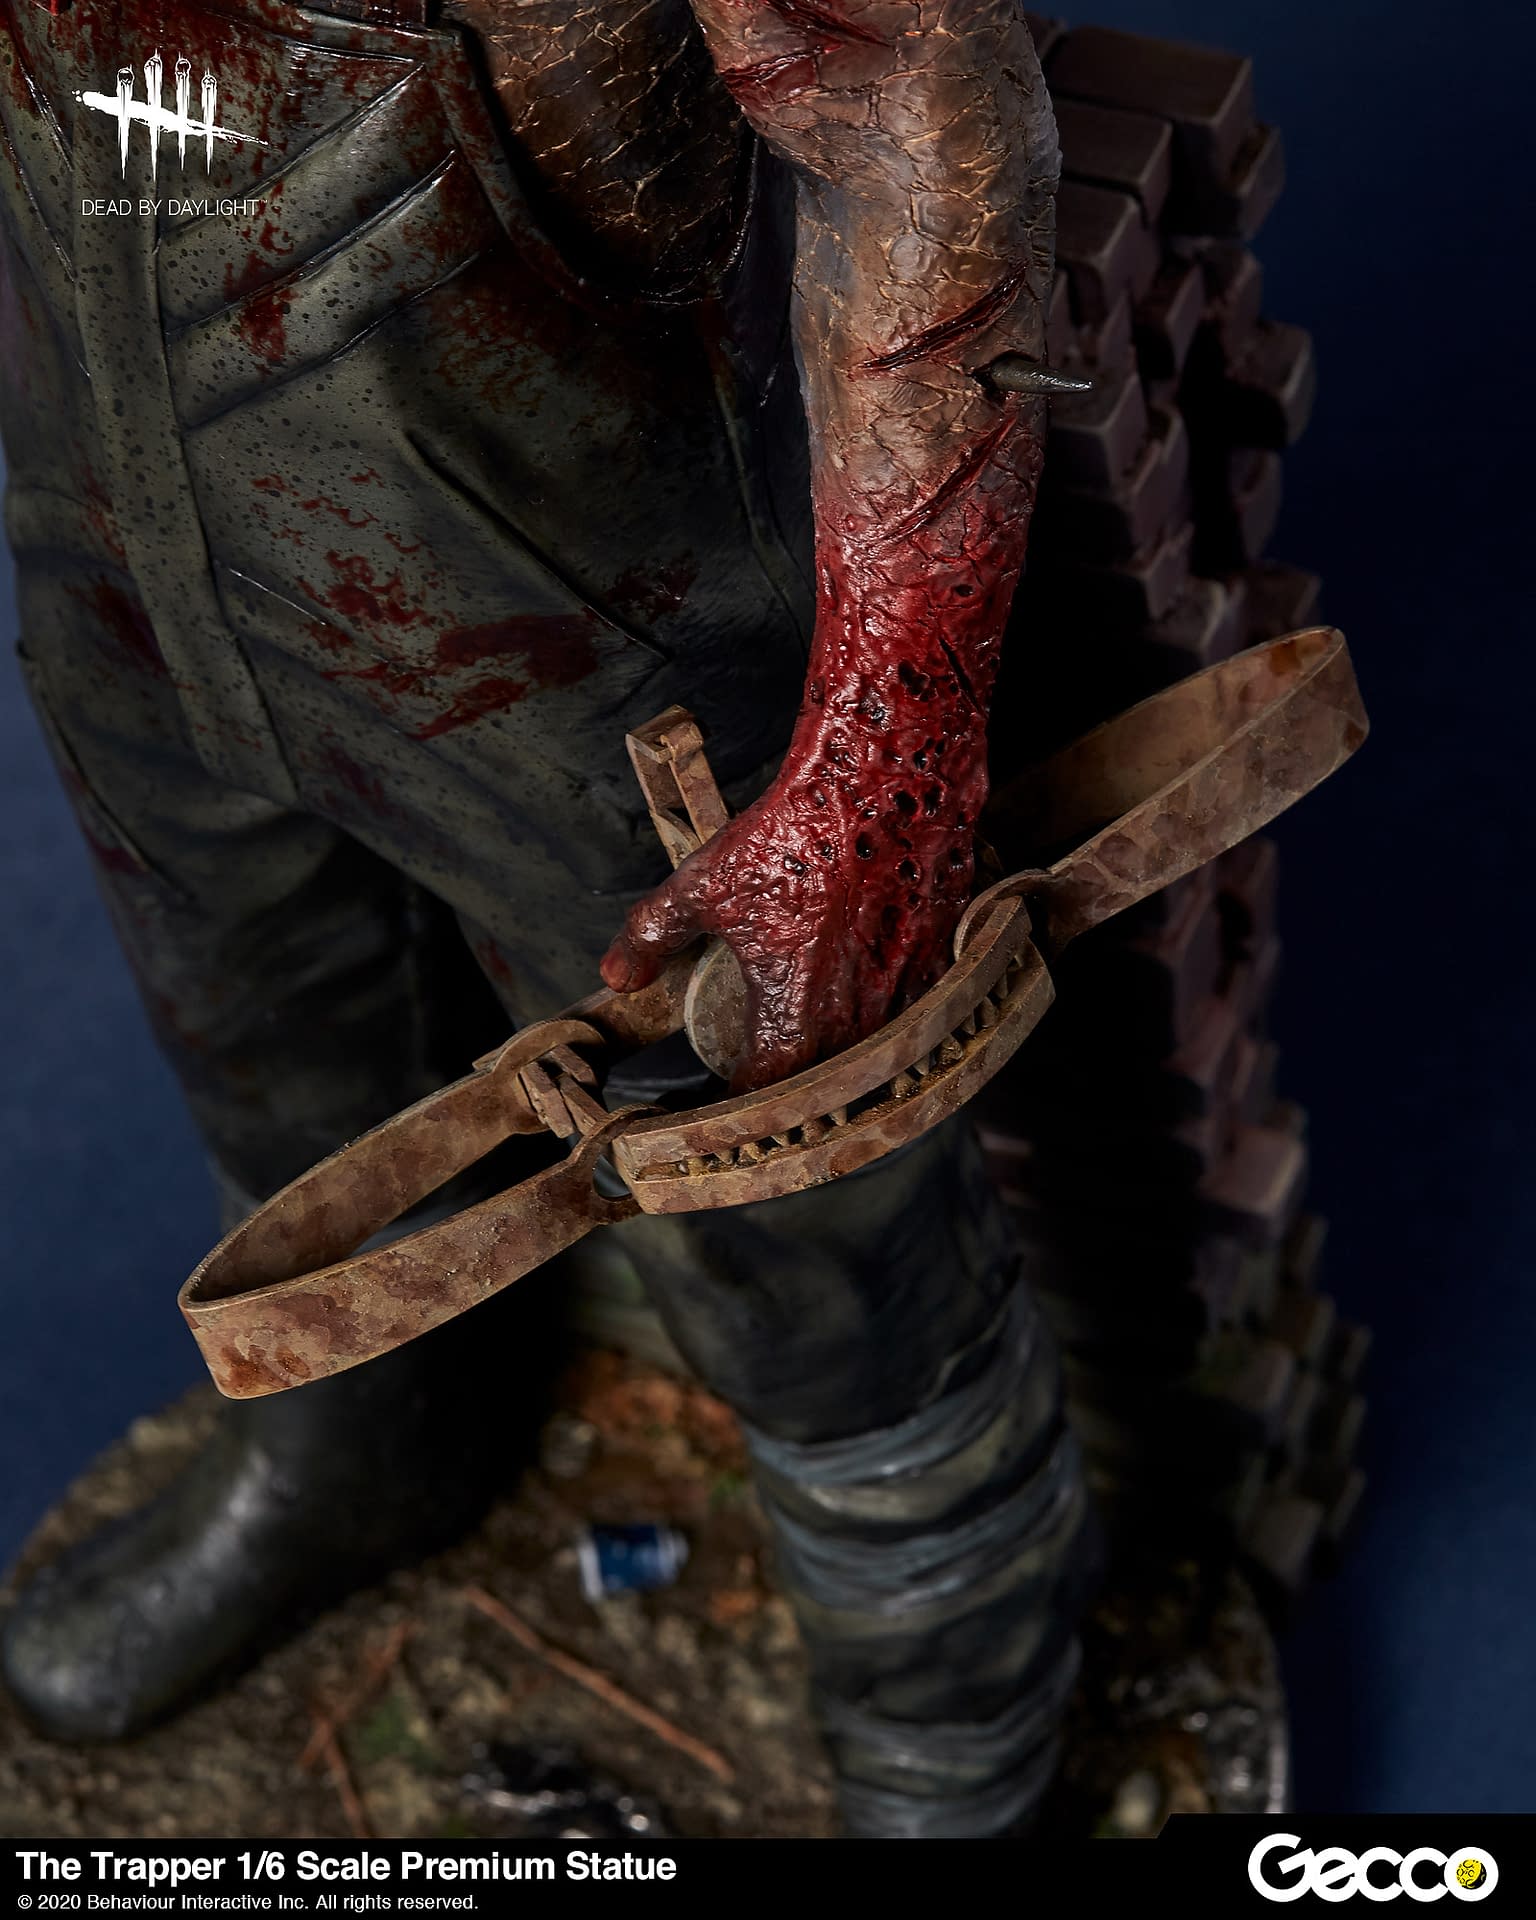 "Dead by Daylight" Sets A Trap With New Statue from Gecco